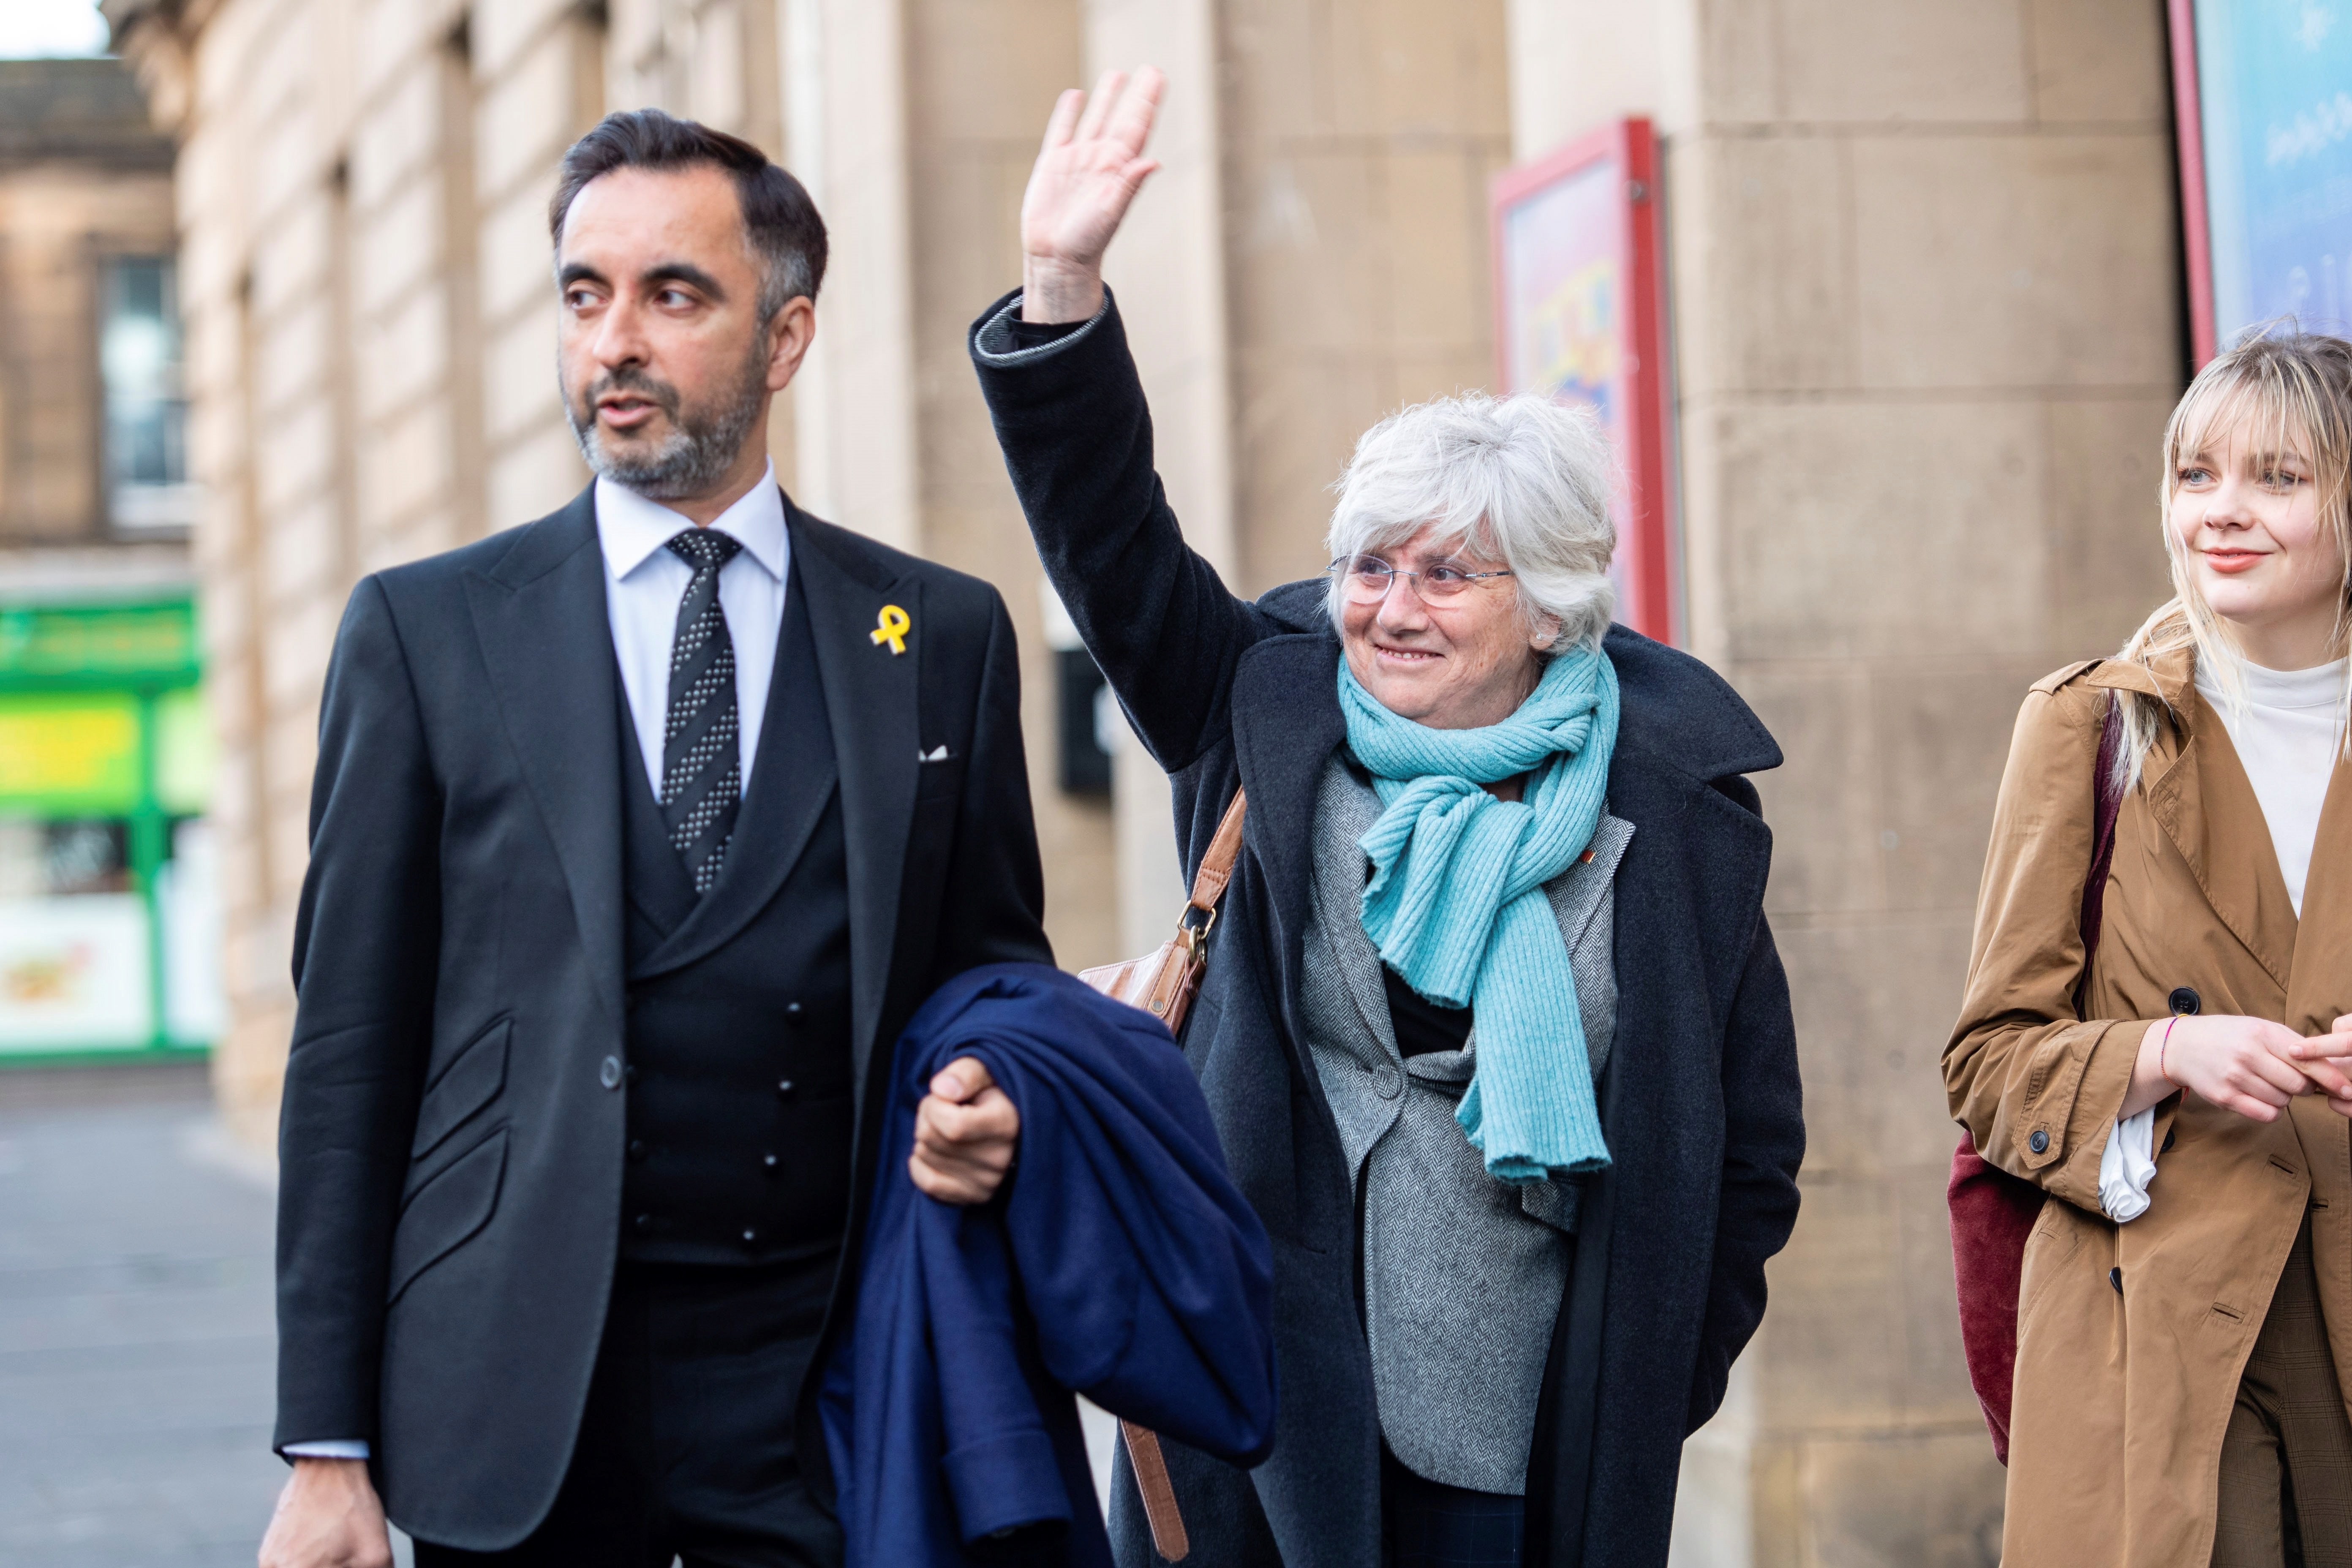 Clara Ponsatí's extradition hearing set for May, but she could become an MEP first